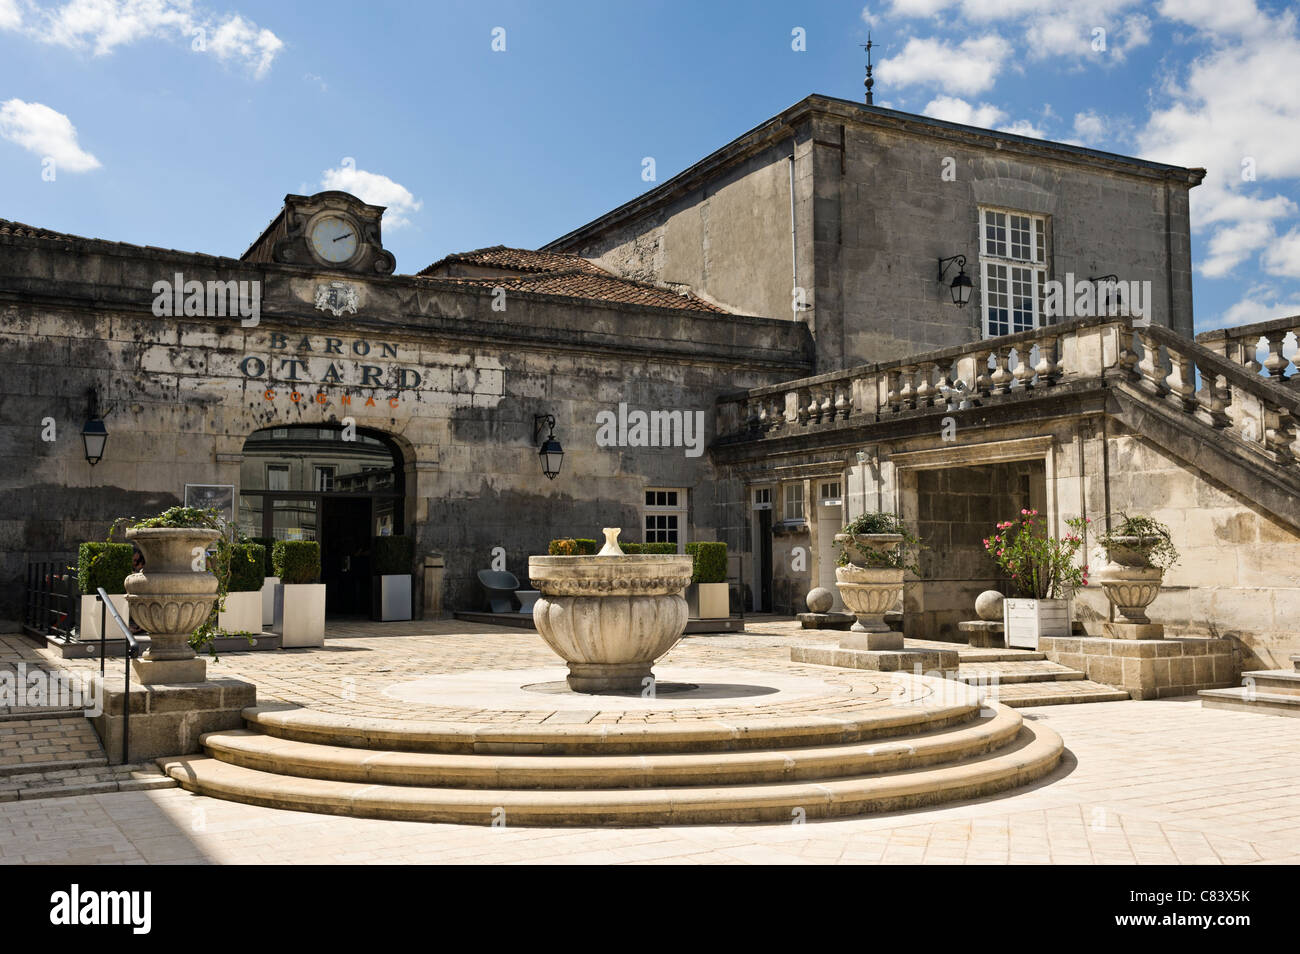 The cognac house of Baron Otard at the Chateau of Francois 1st, in the town of Cognac, Charente, France Stock Photo